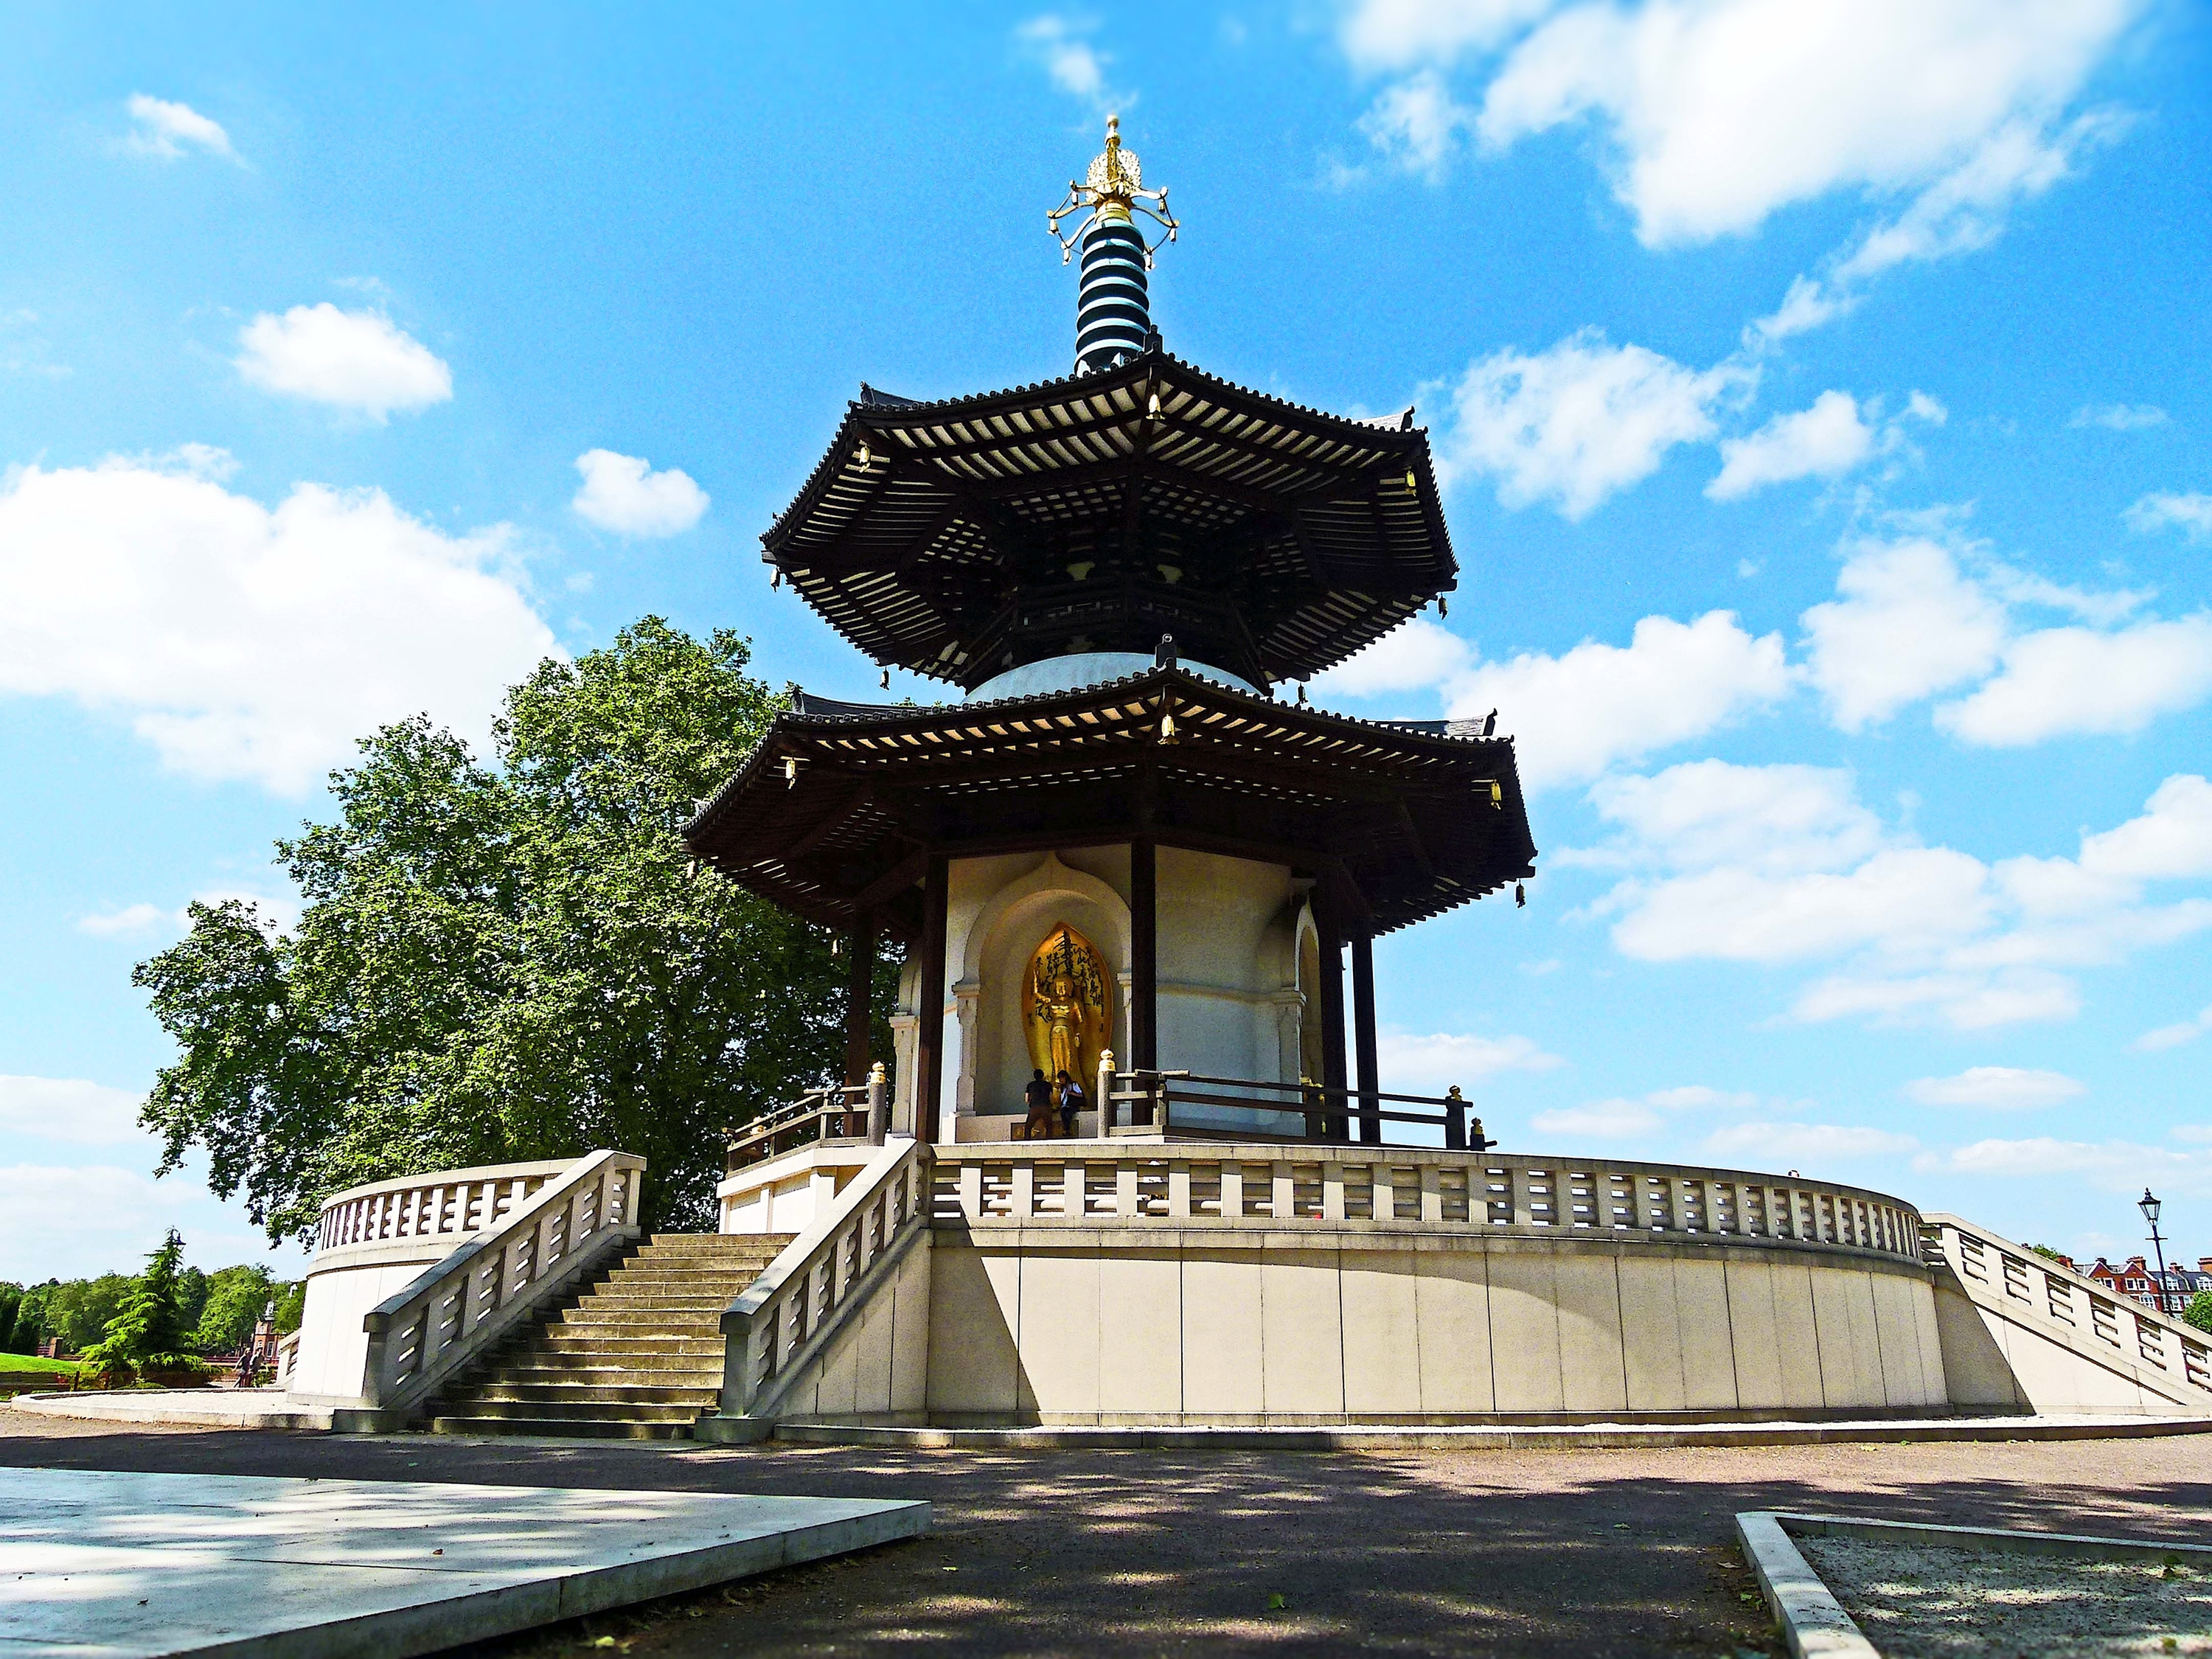 Five things you should know about the Peace Pagoda in Battersea